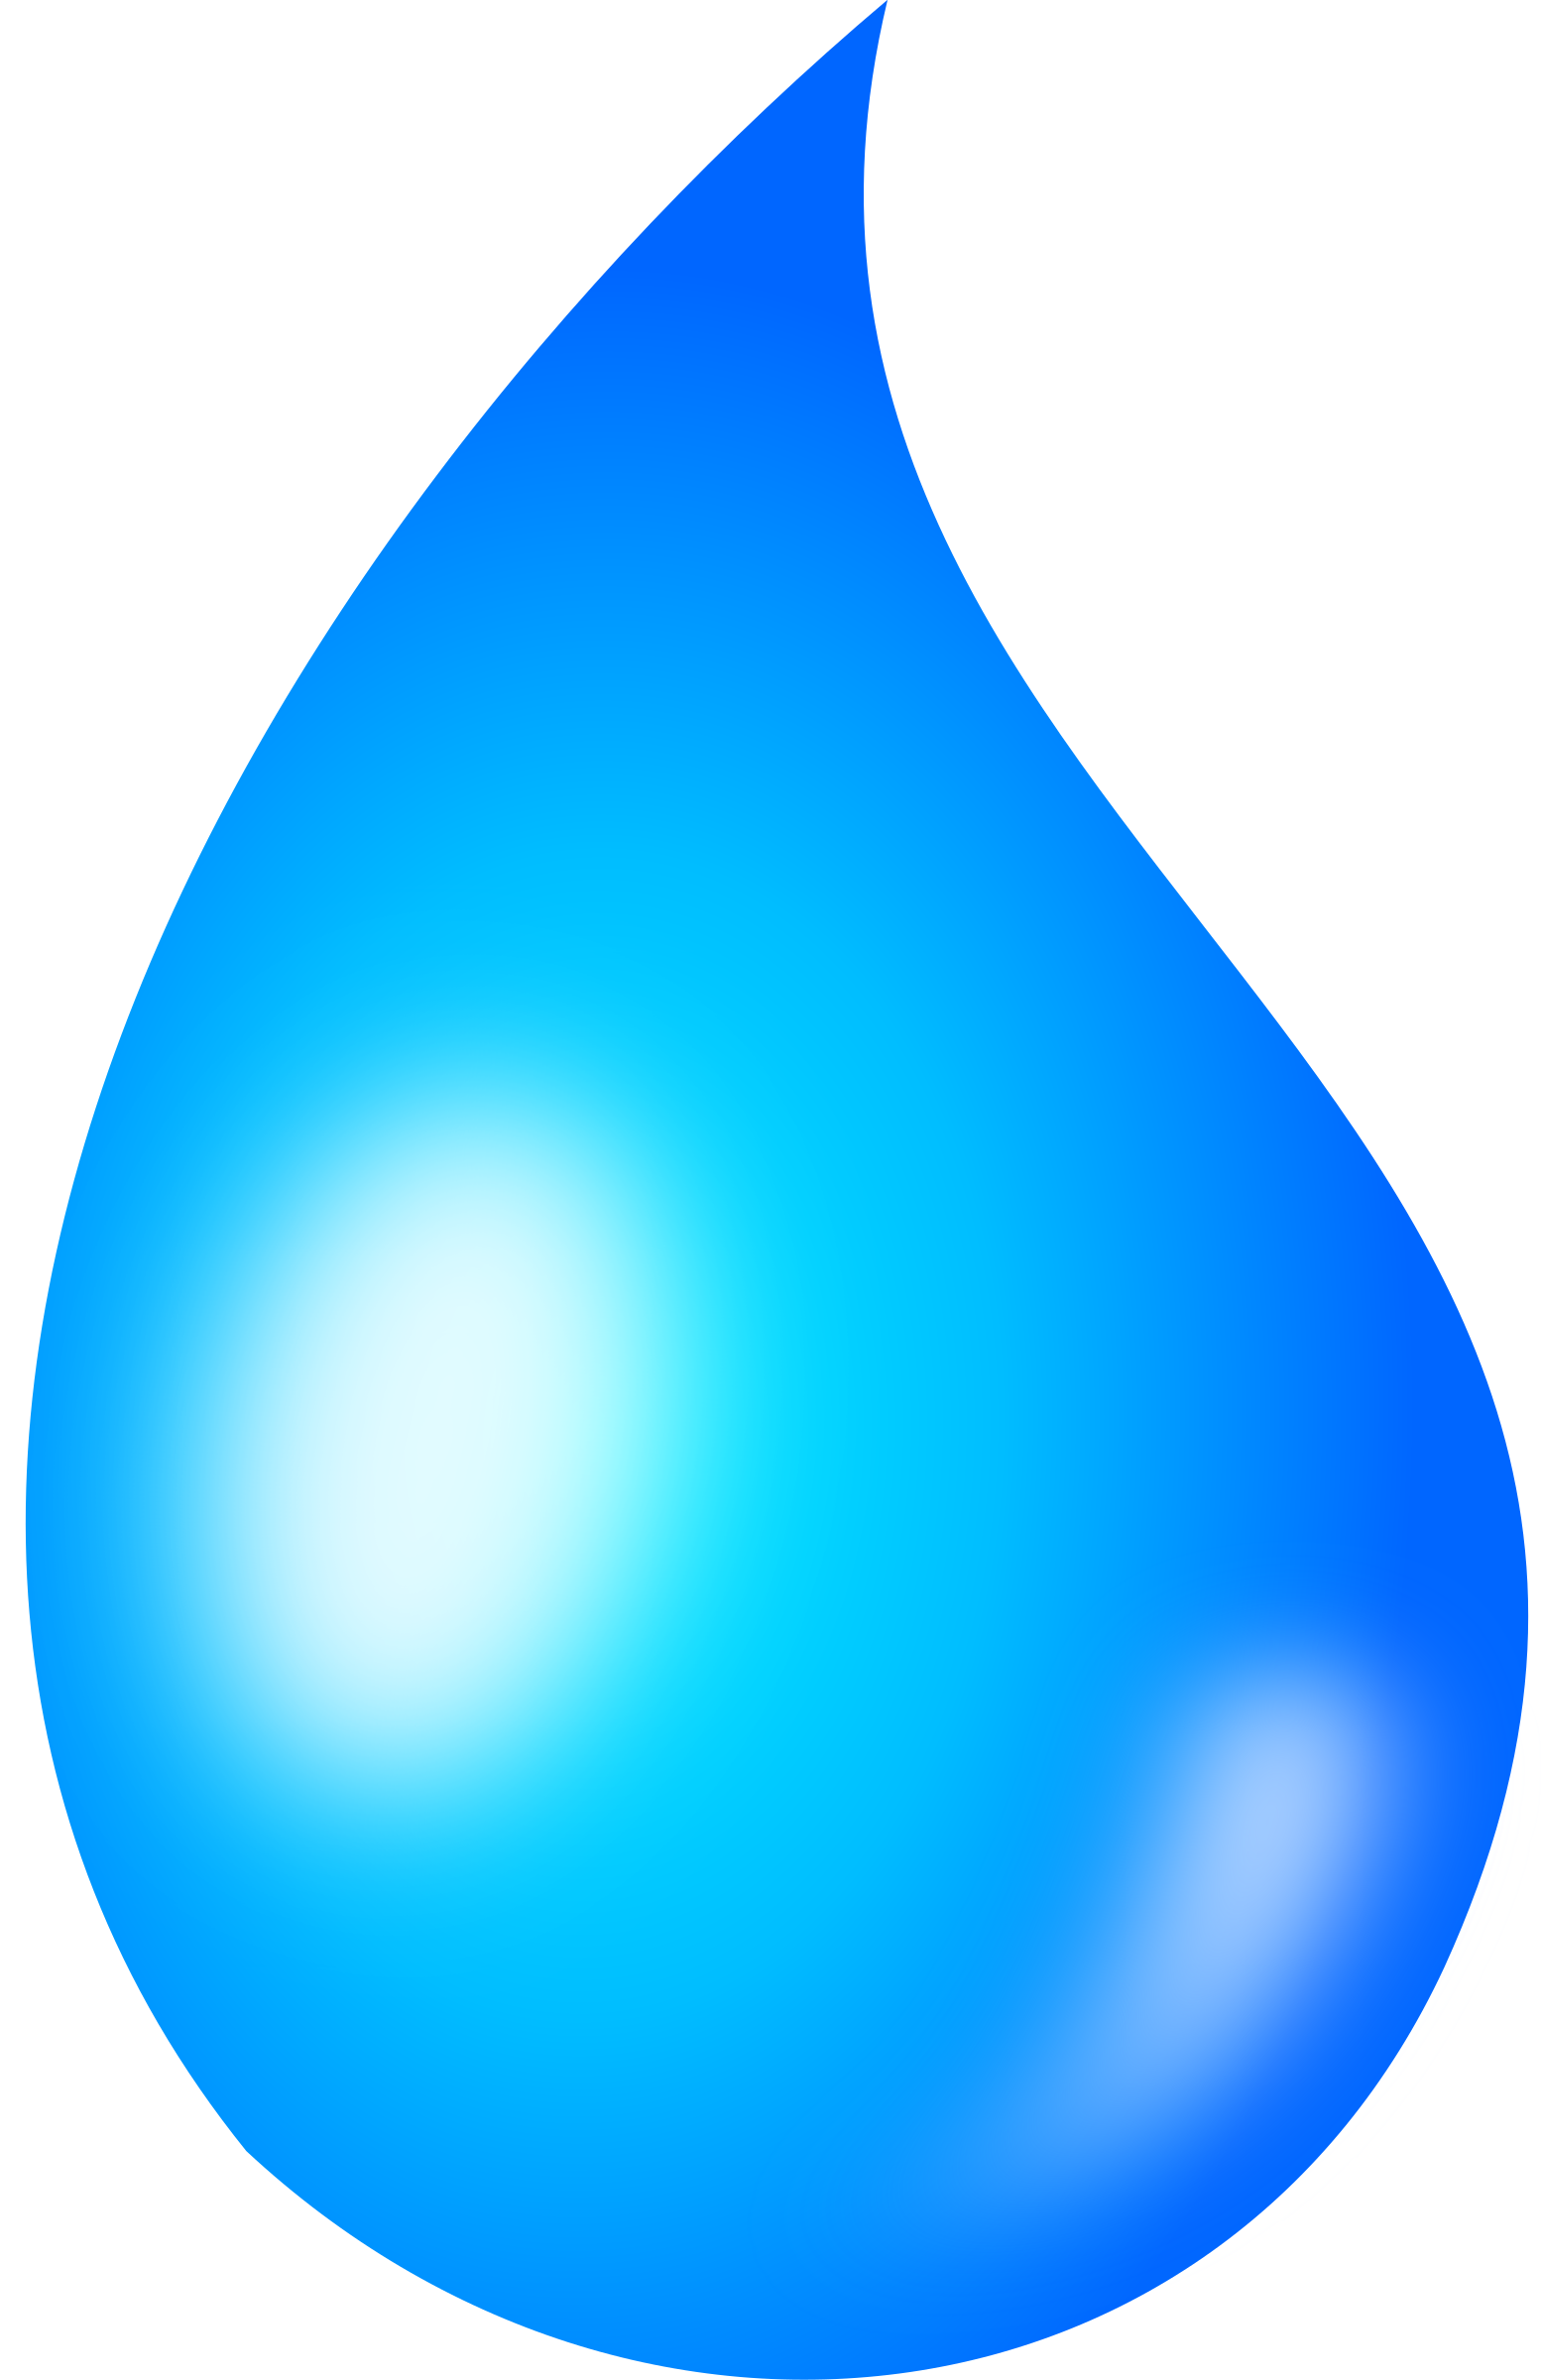 Water Drop Png File - Water Droplet, Transparent background PNG HD thumbnail